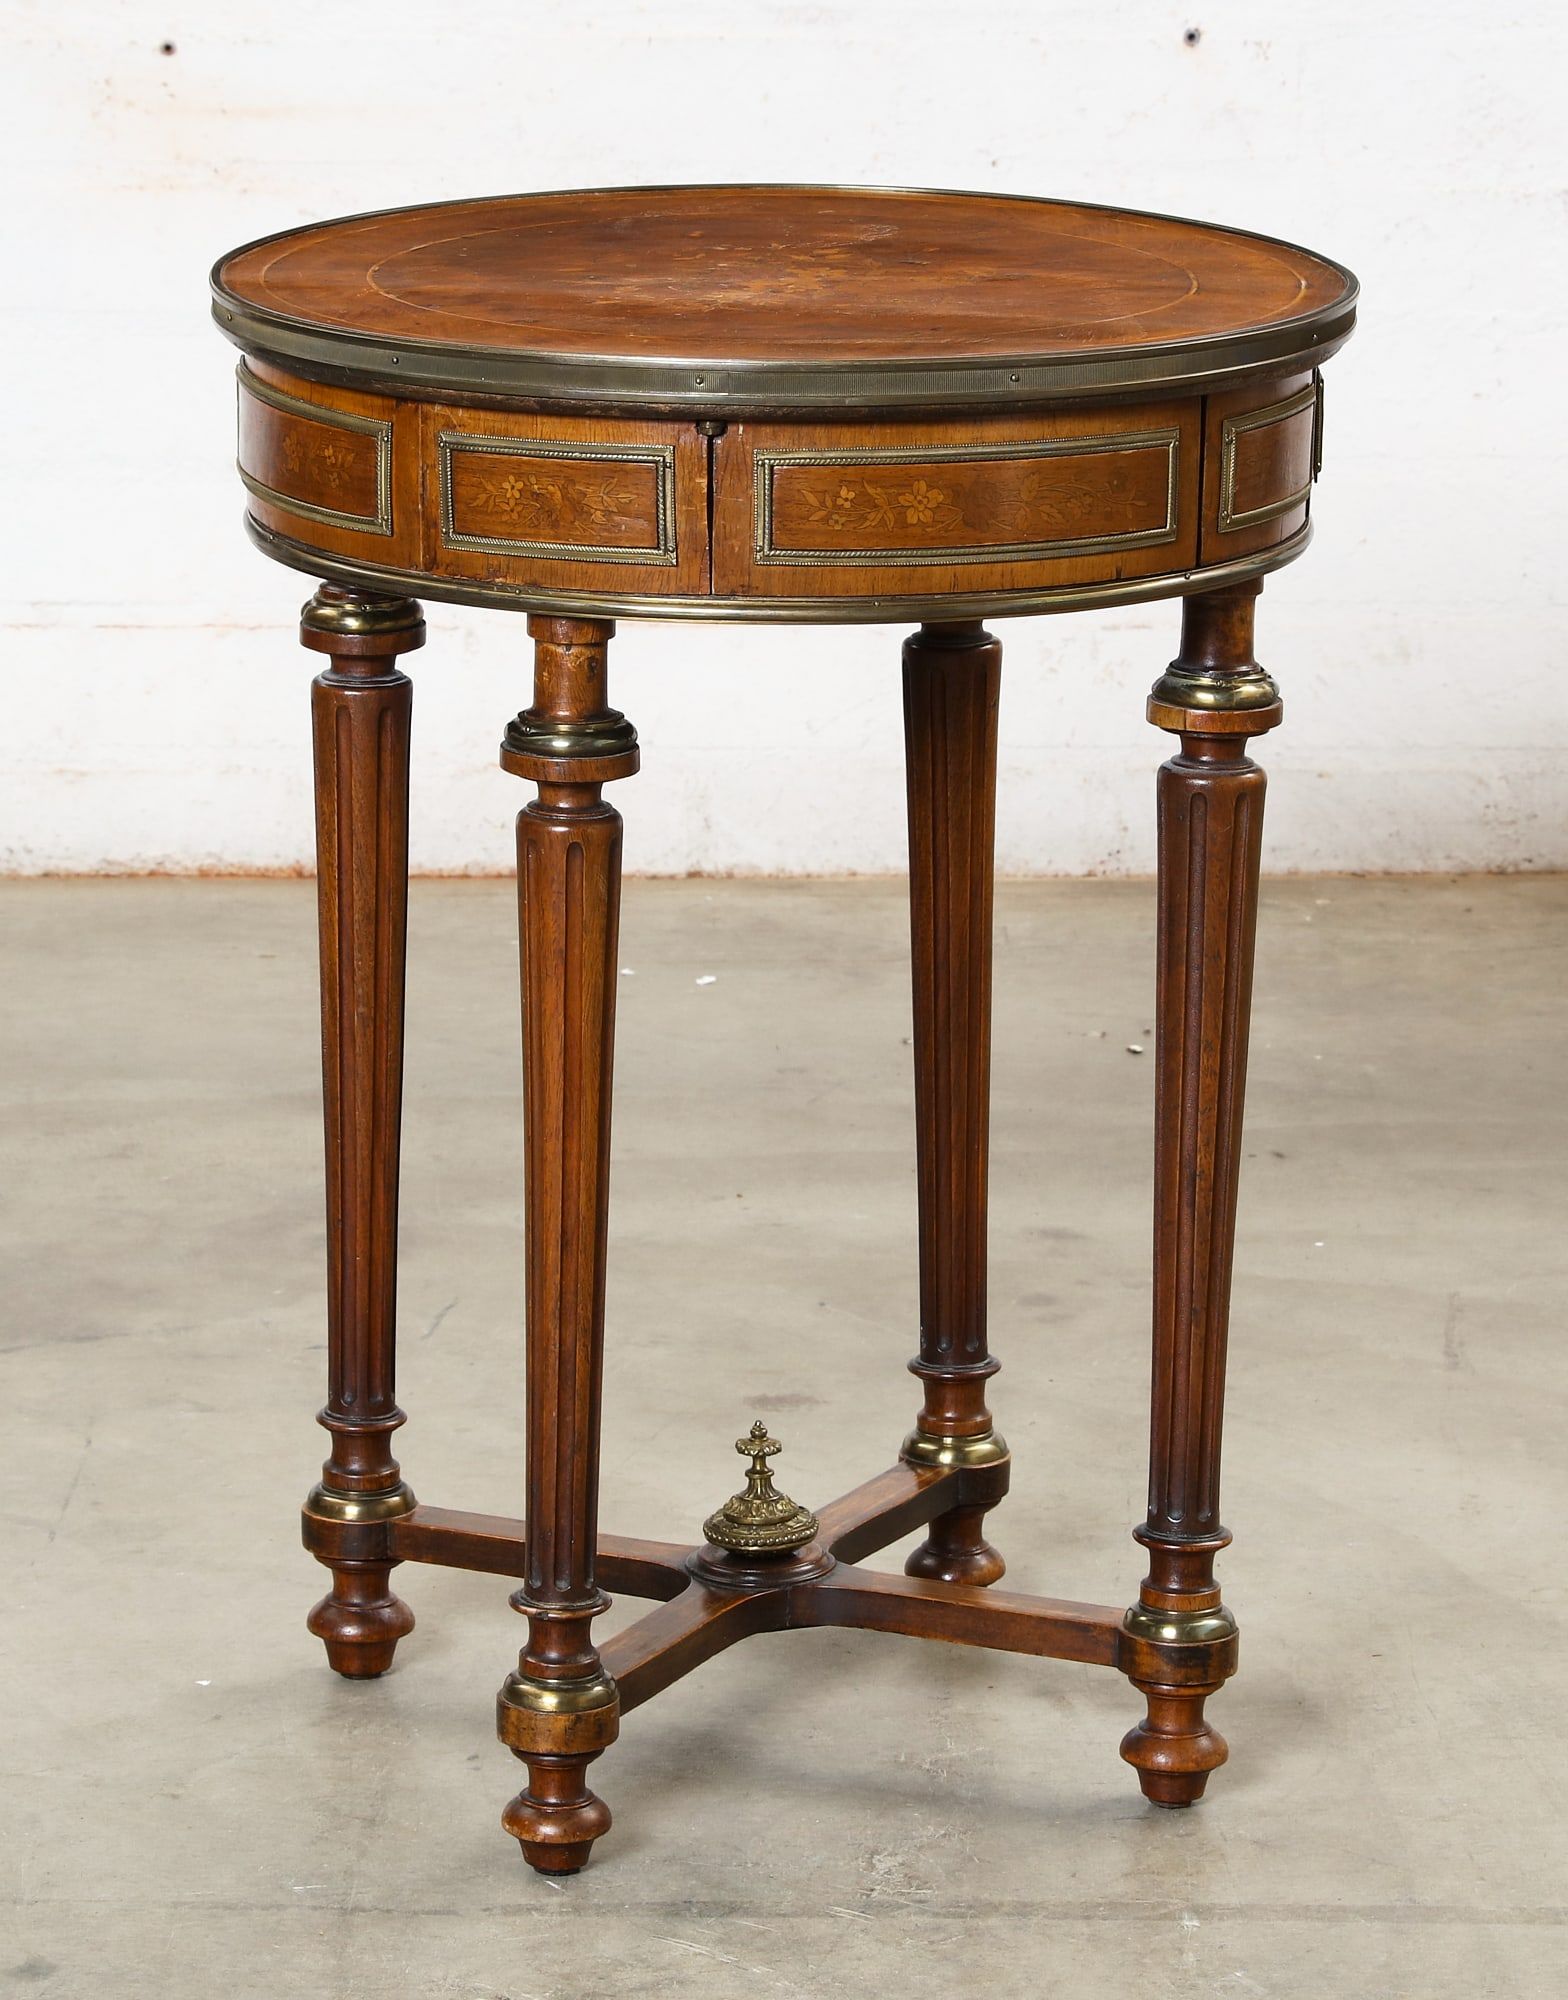 A LOUIS XVI STYLE MAHOGANY OCCASIONAL